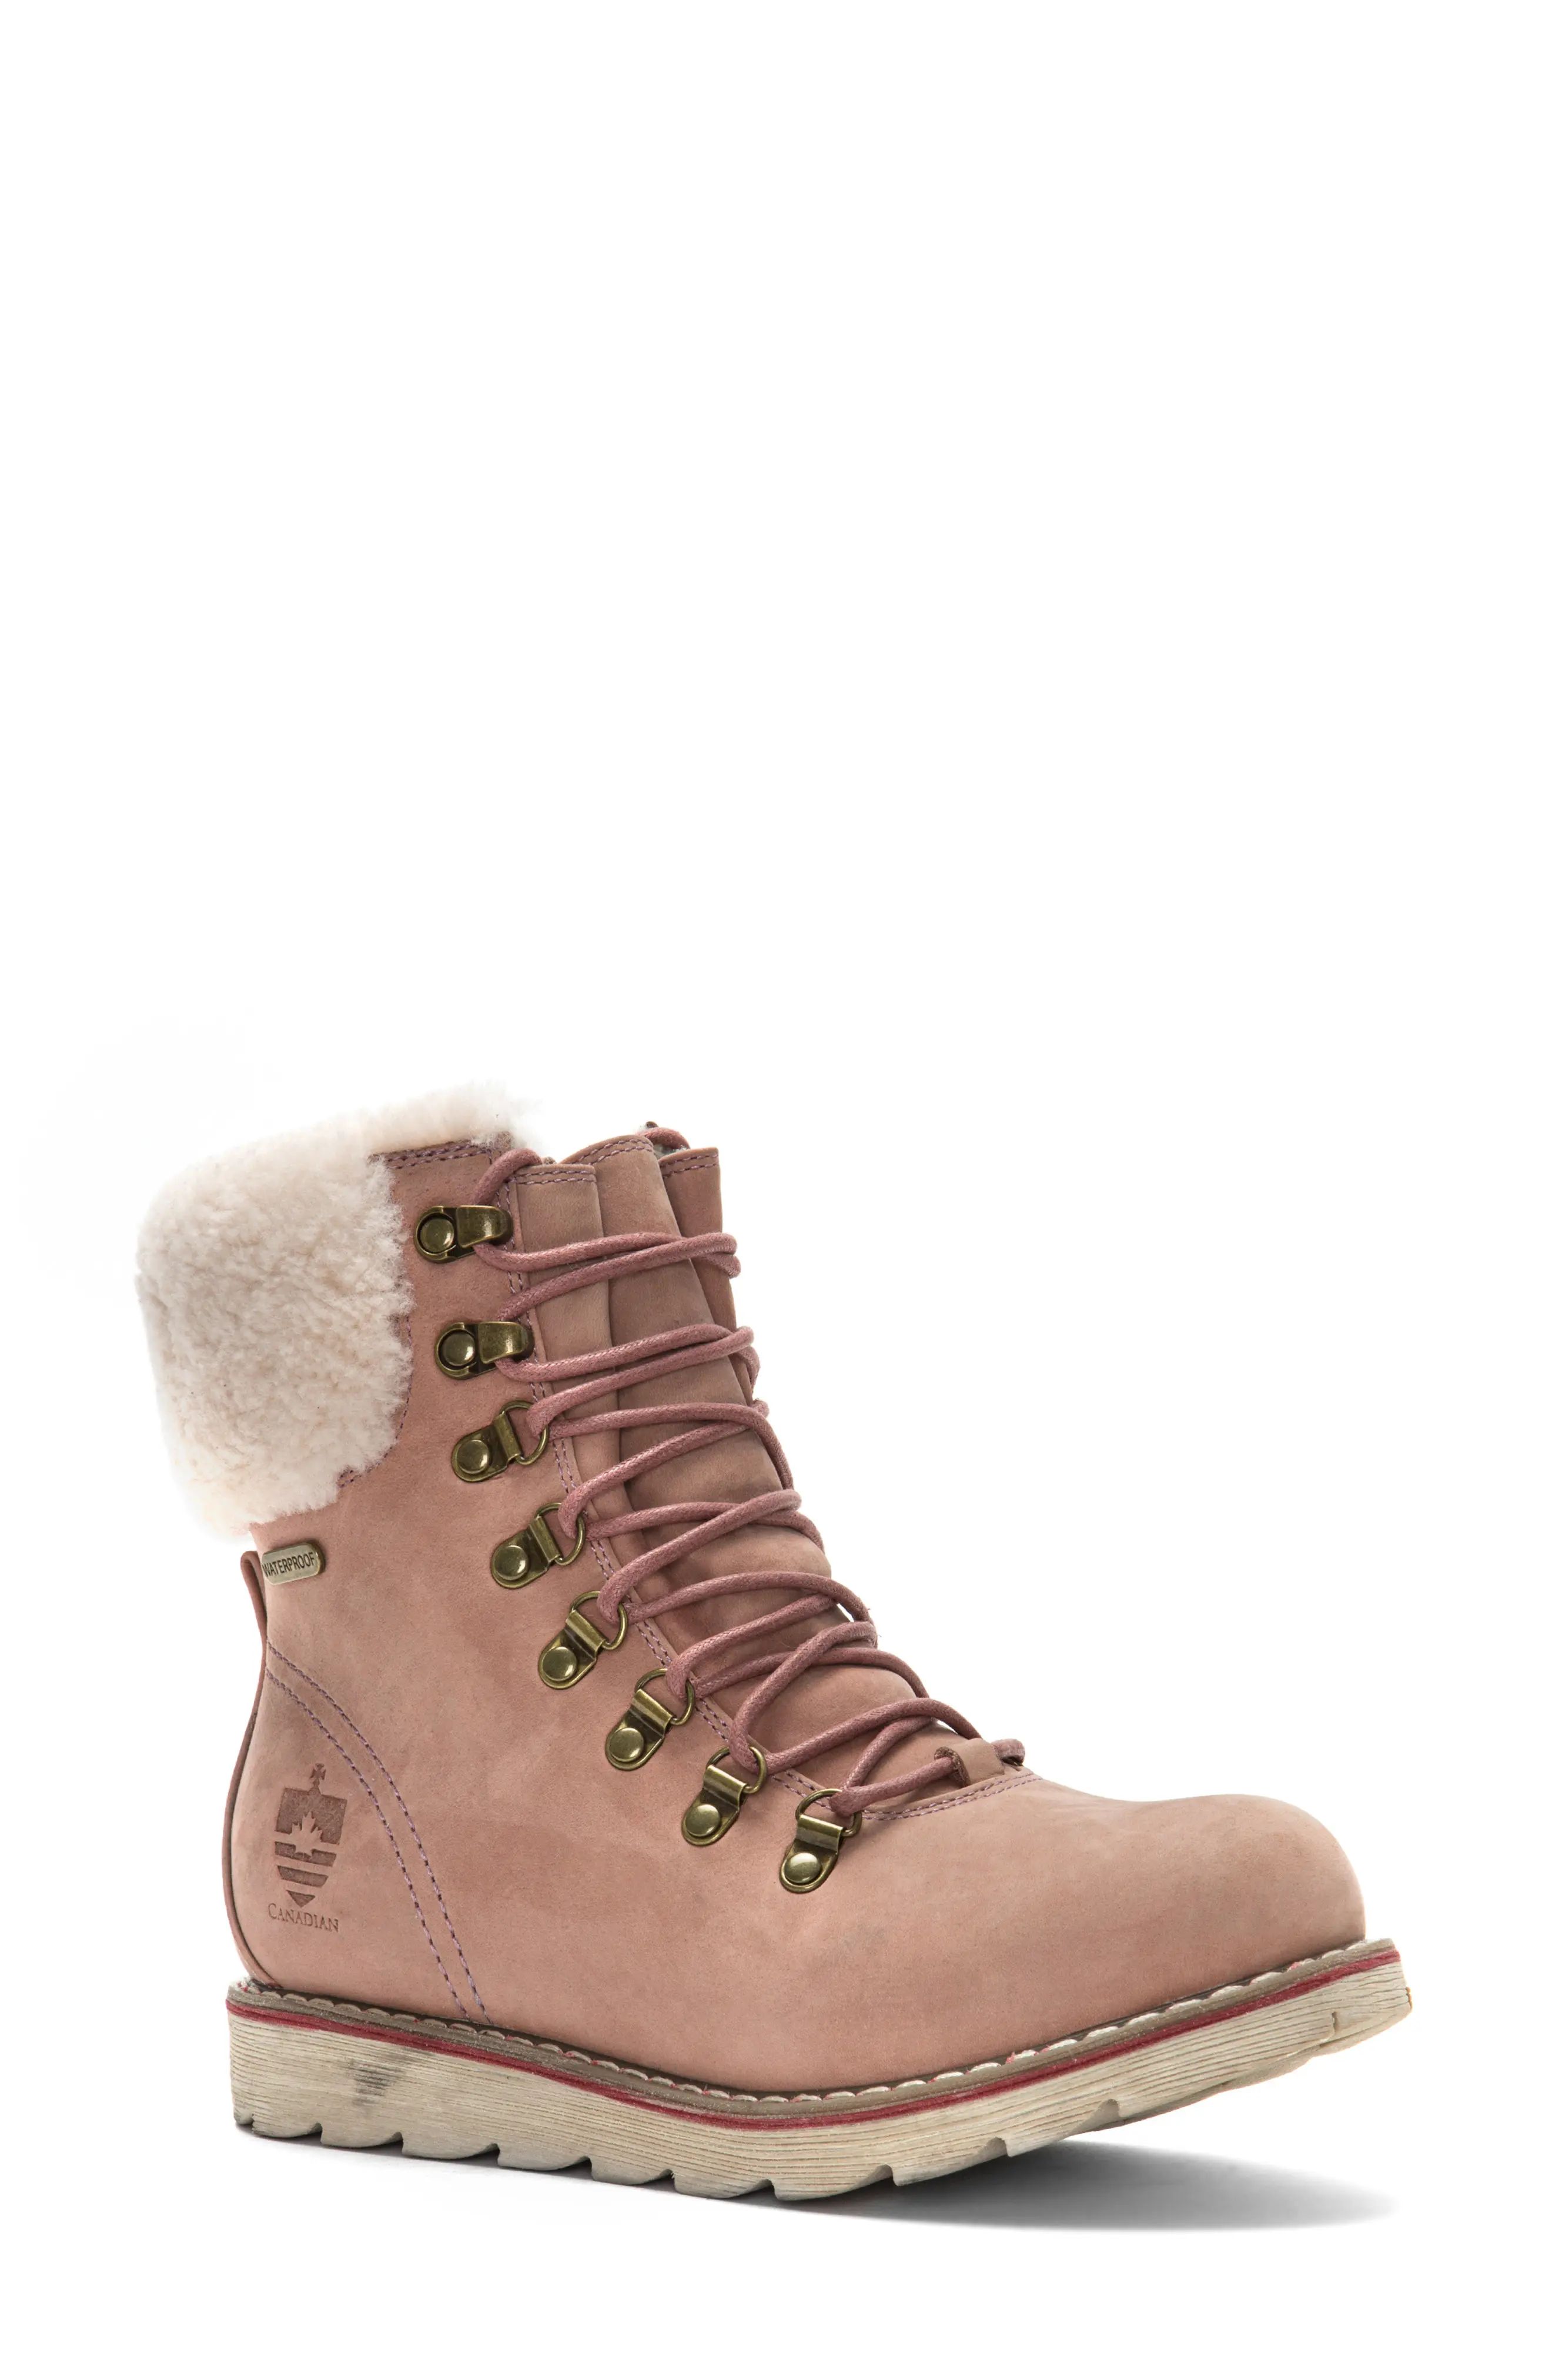 Women's Royal Canadian Lethbridge Waterproof Snow Boot With Genuine Shearling Cuff, Size 7 M - Pink | Nordstrom